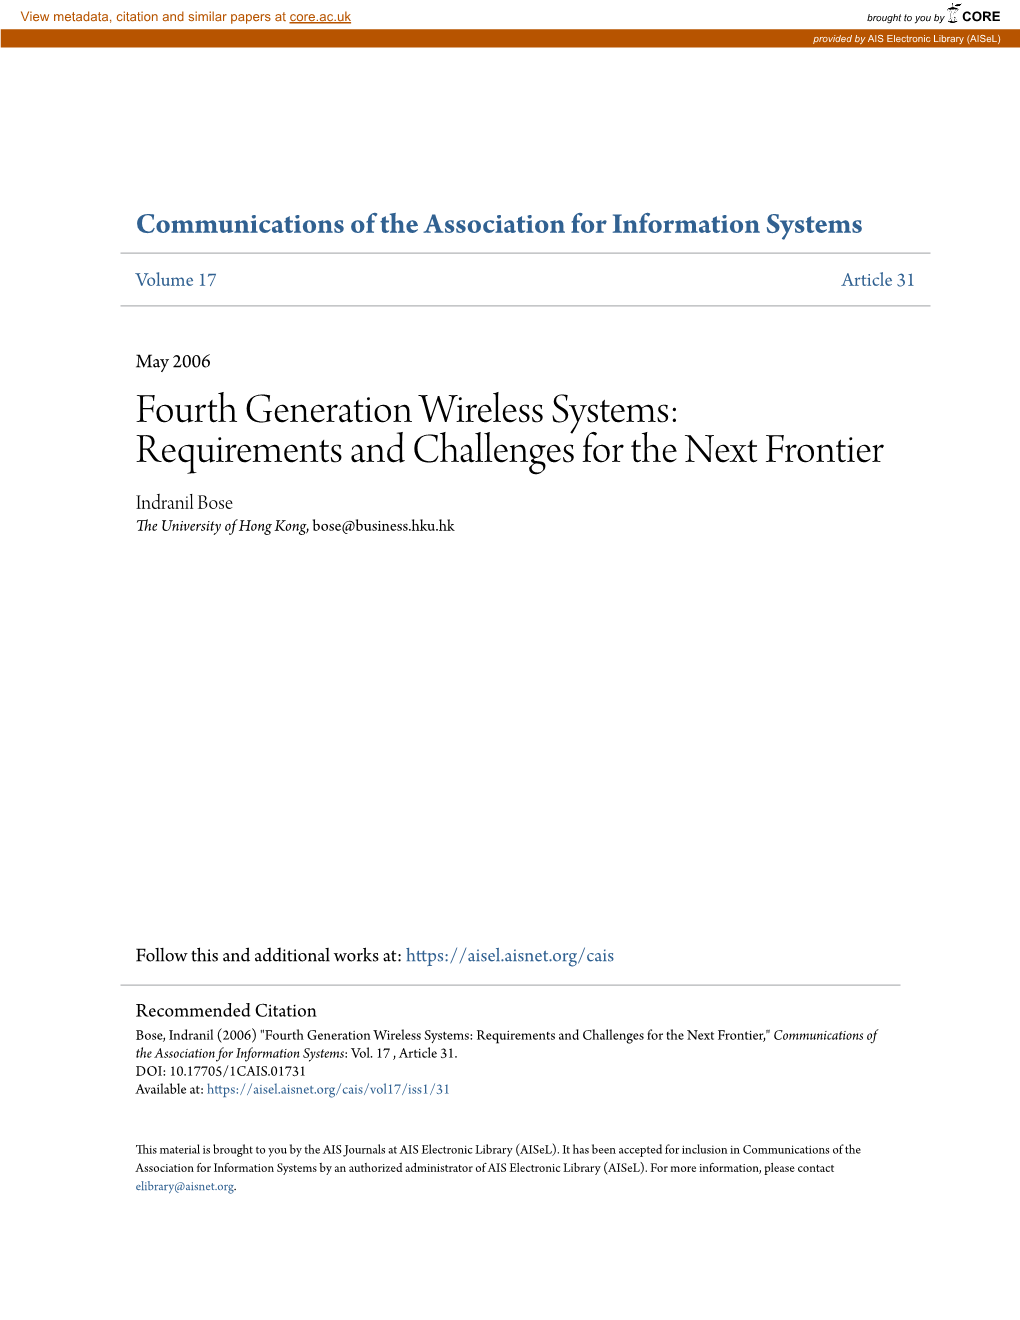 Fourth Generation Wireless Systems: Requirements and Challenges for the Next Frontier Indranil Bose the University of Hong Kong, Bose@Business.Hku.Hk